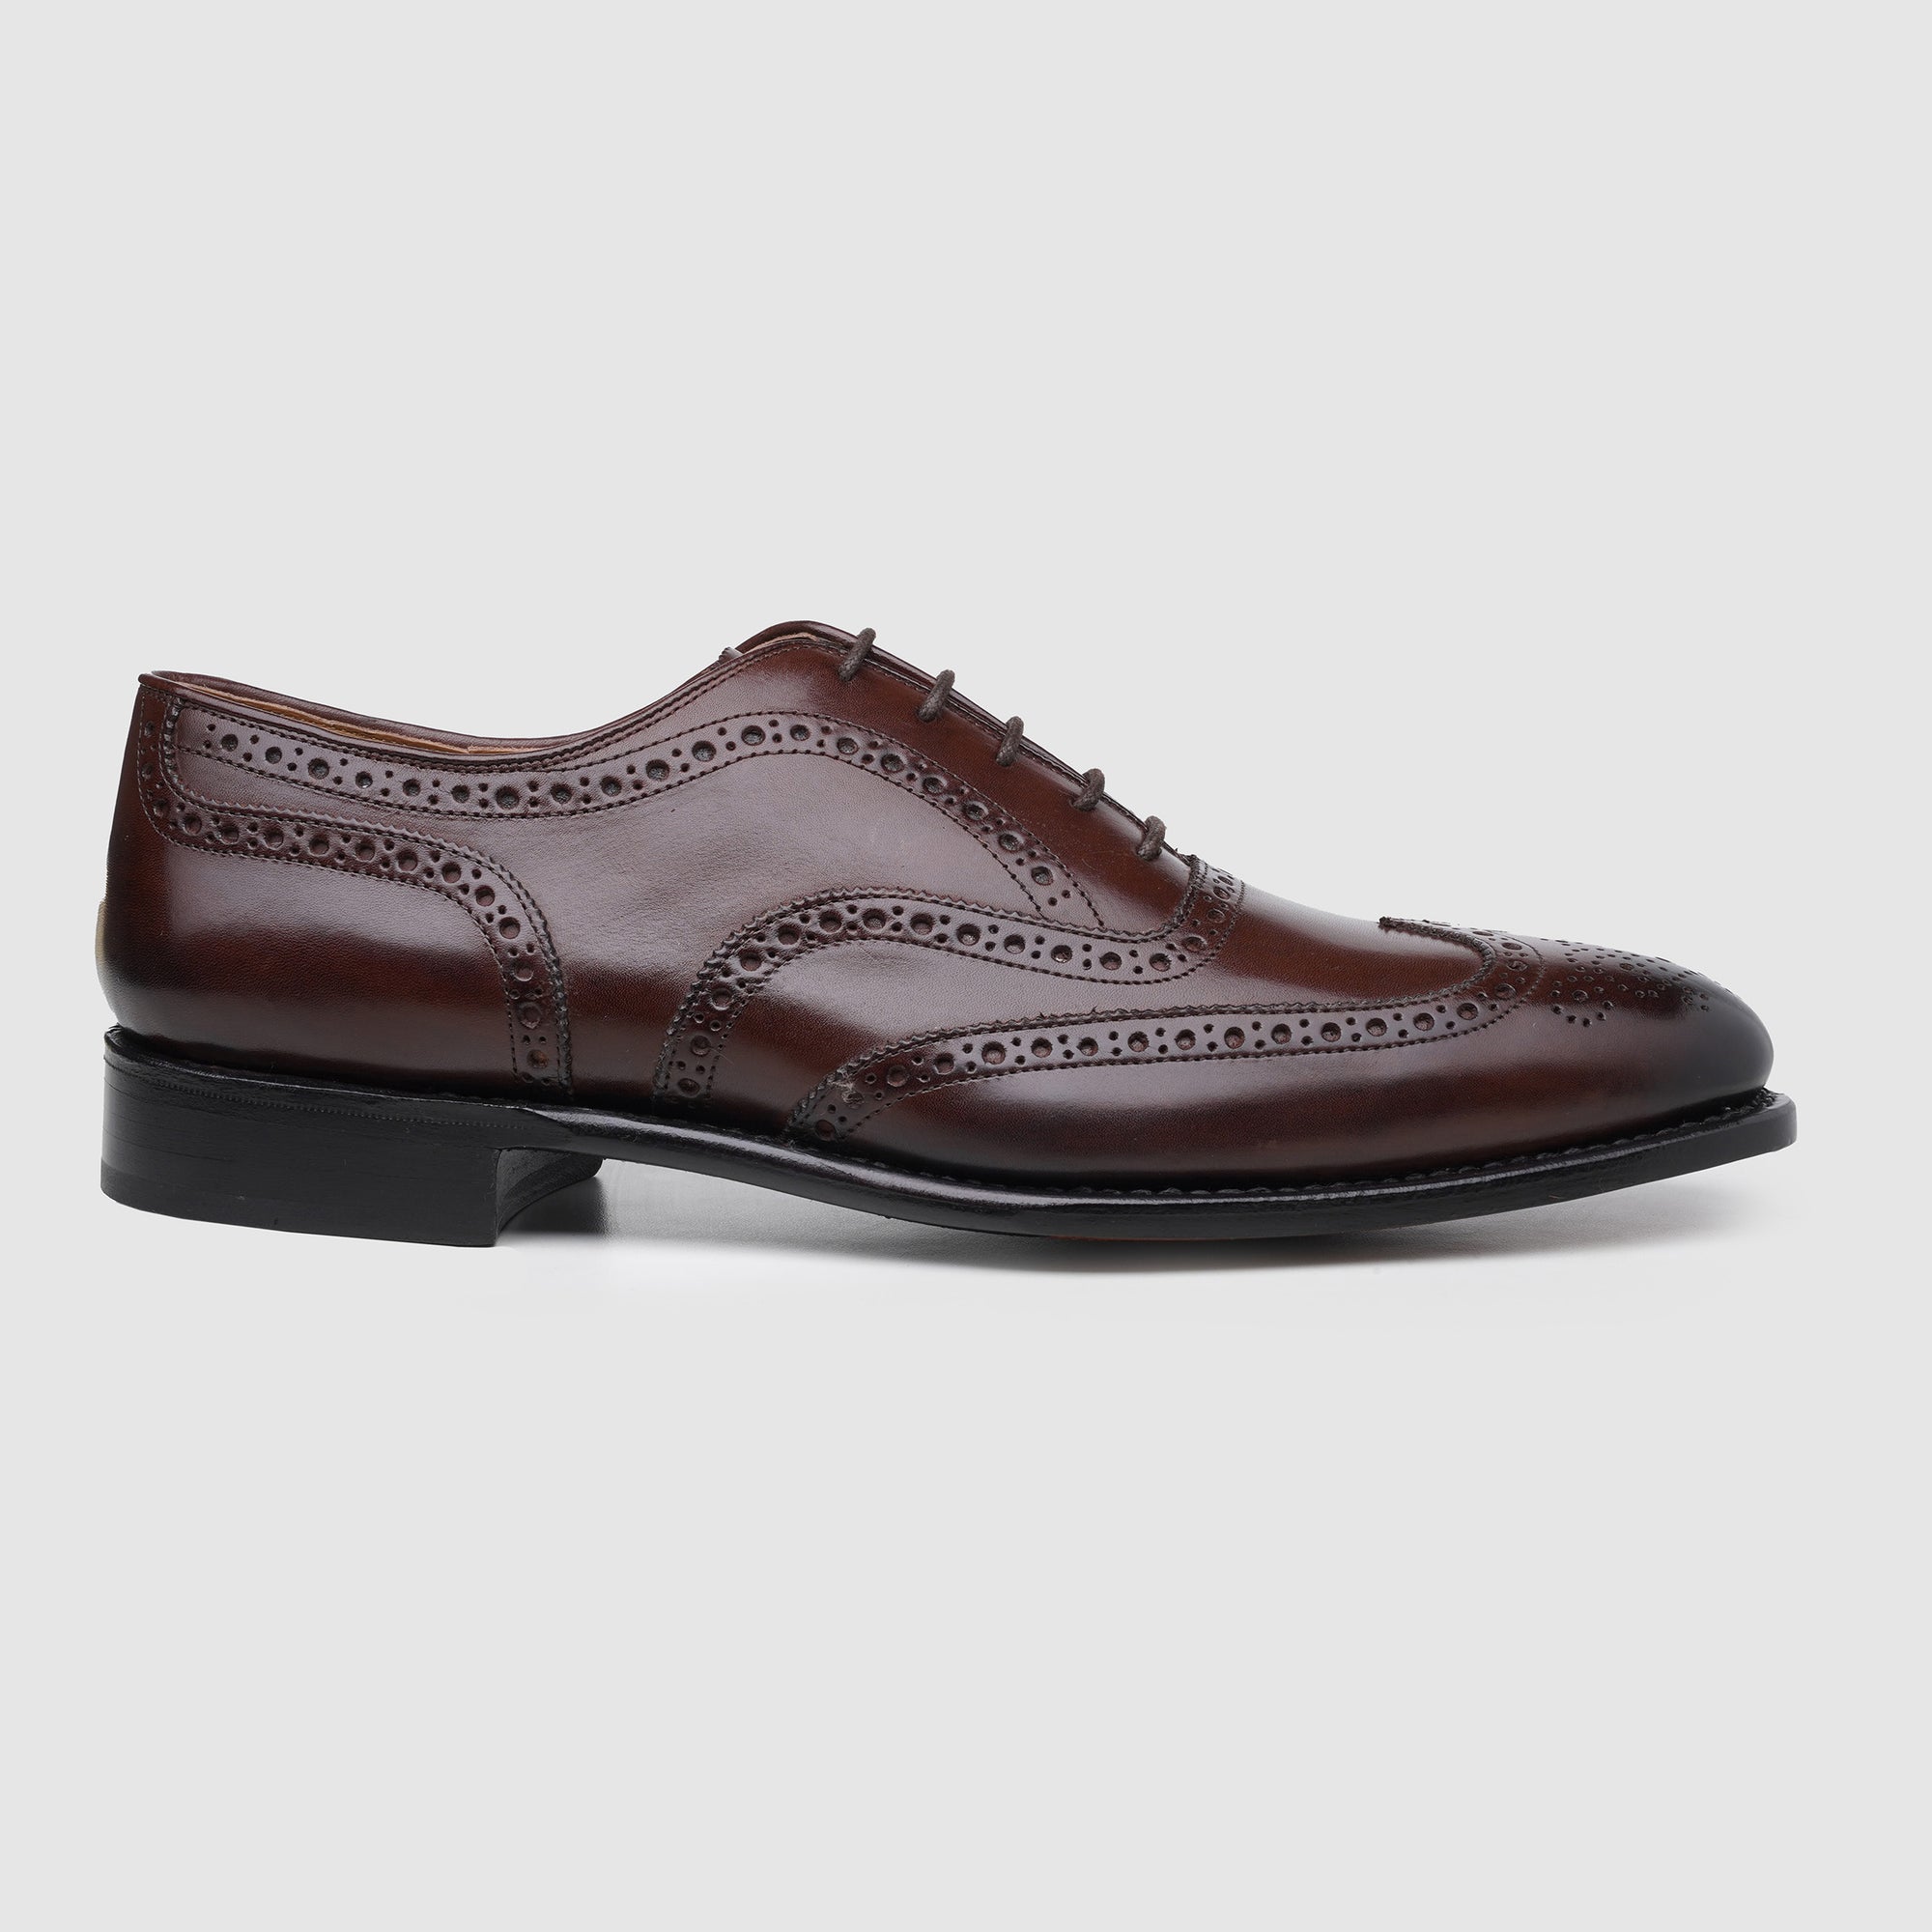 Wingtip Brogue Oxfords Brown 439 Goodyear Welted